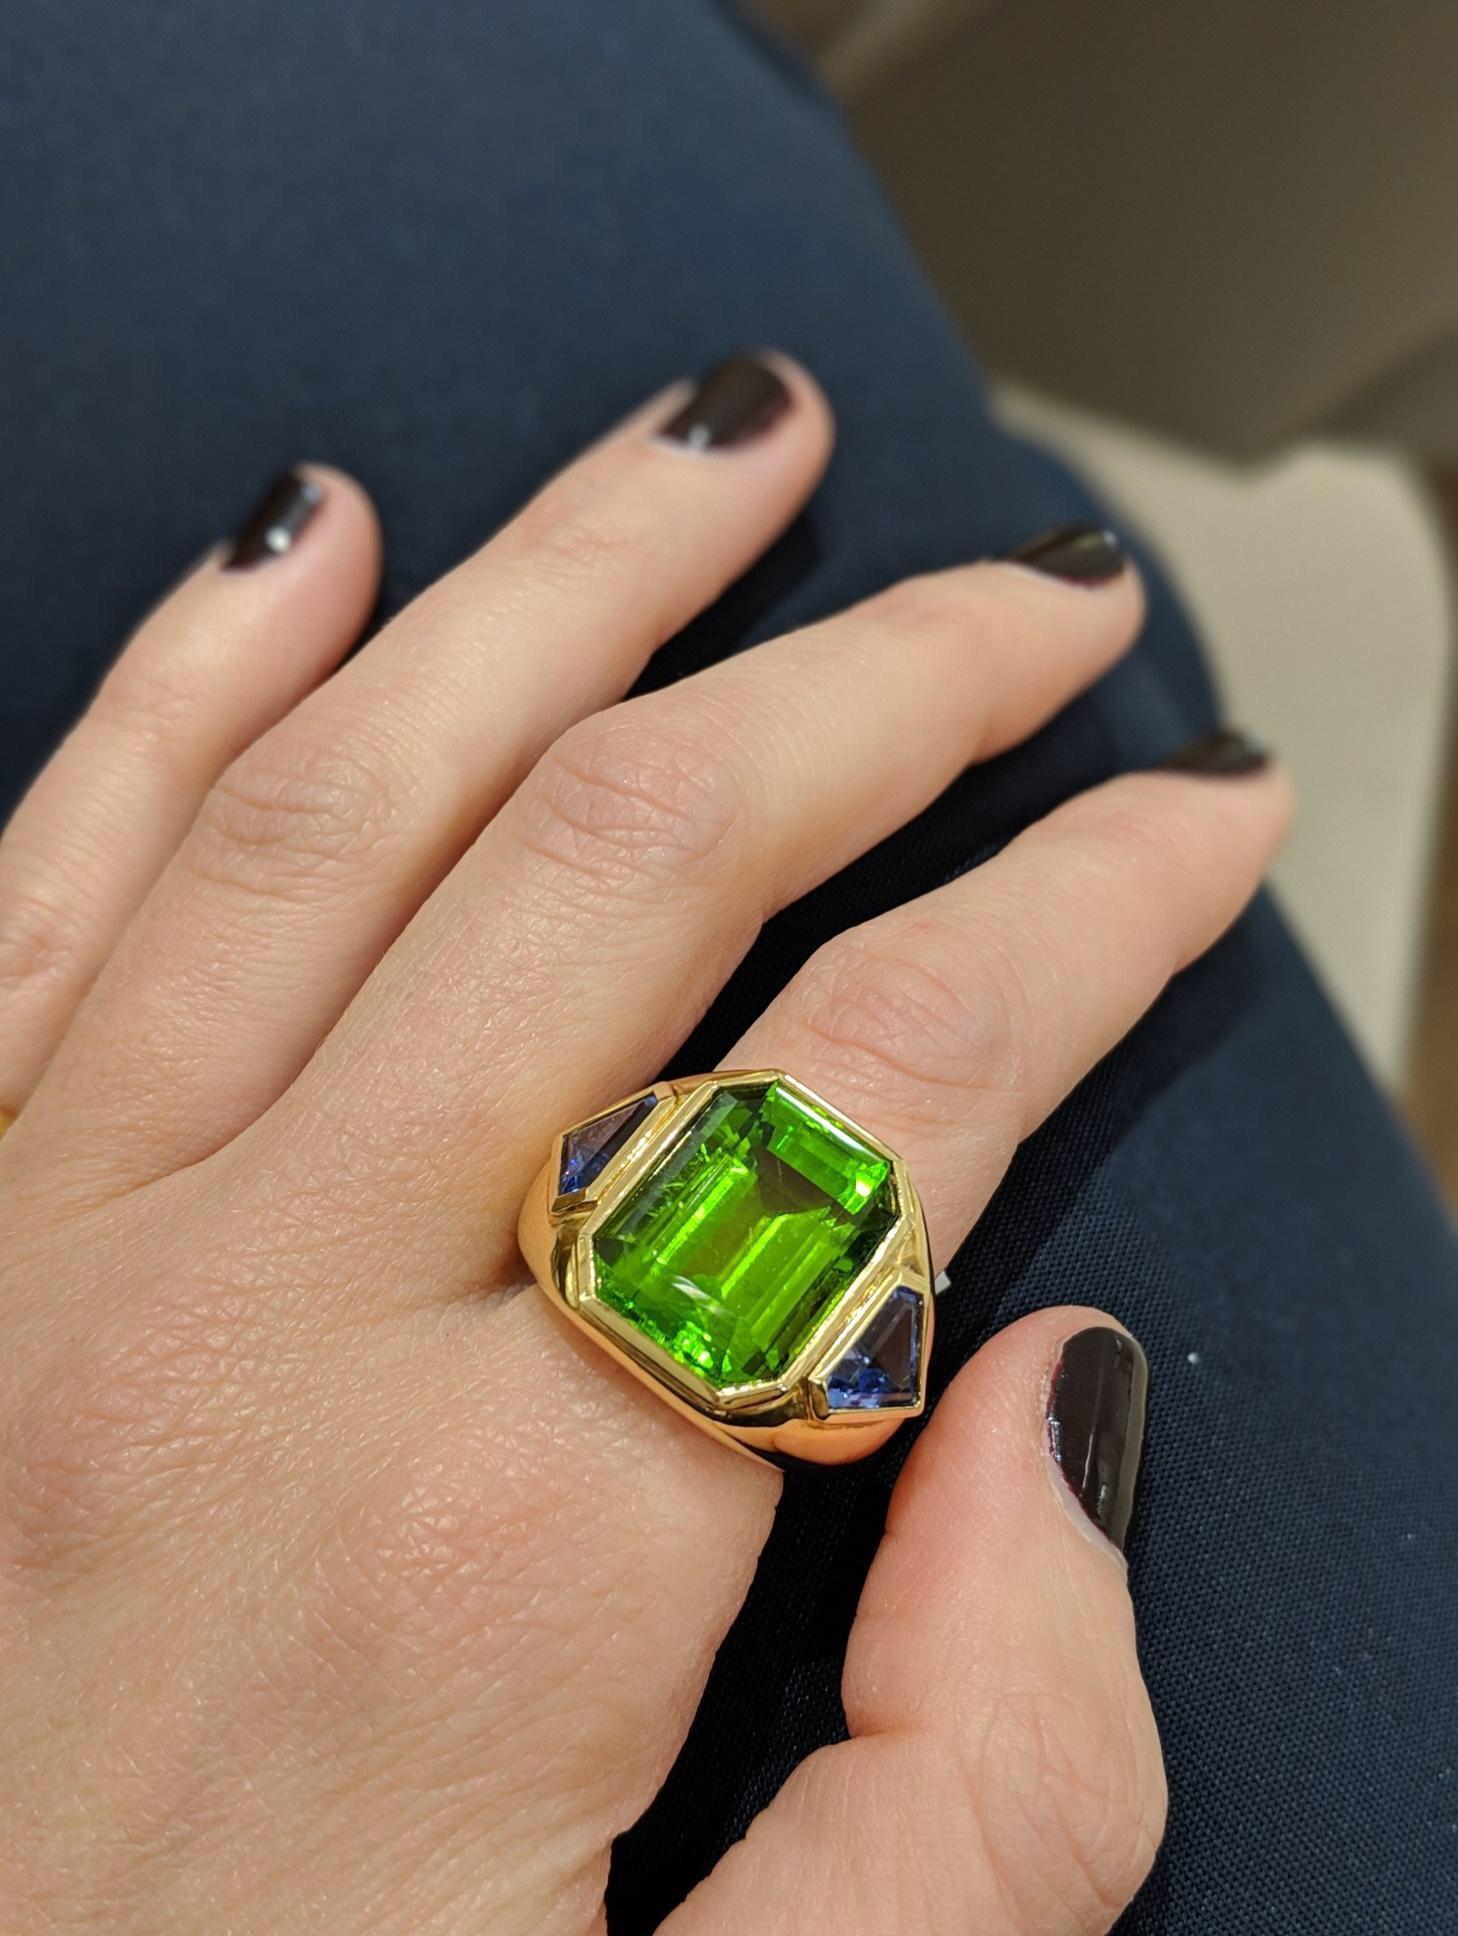 One of a kind, handmade ring exclusively for Cellini. This 18kt yellow gold high polished ring centers a magnificent Emerald cut Peridot weighing 15.22 carats, flanked by a pair of Tanzanite shields weighing 1.87 carats. The ring is designed so that